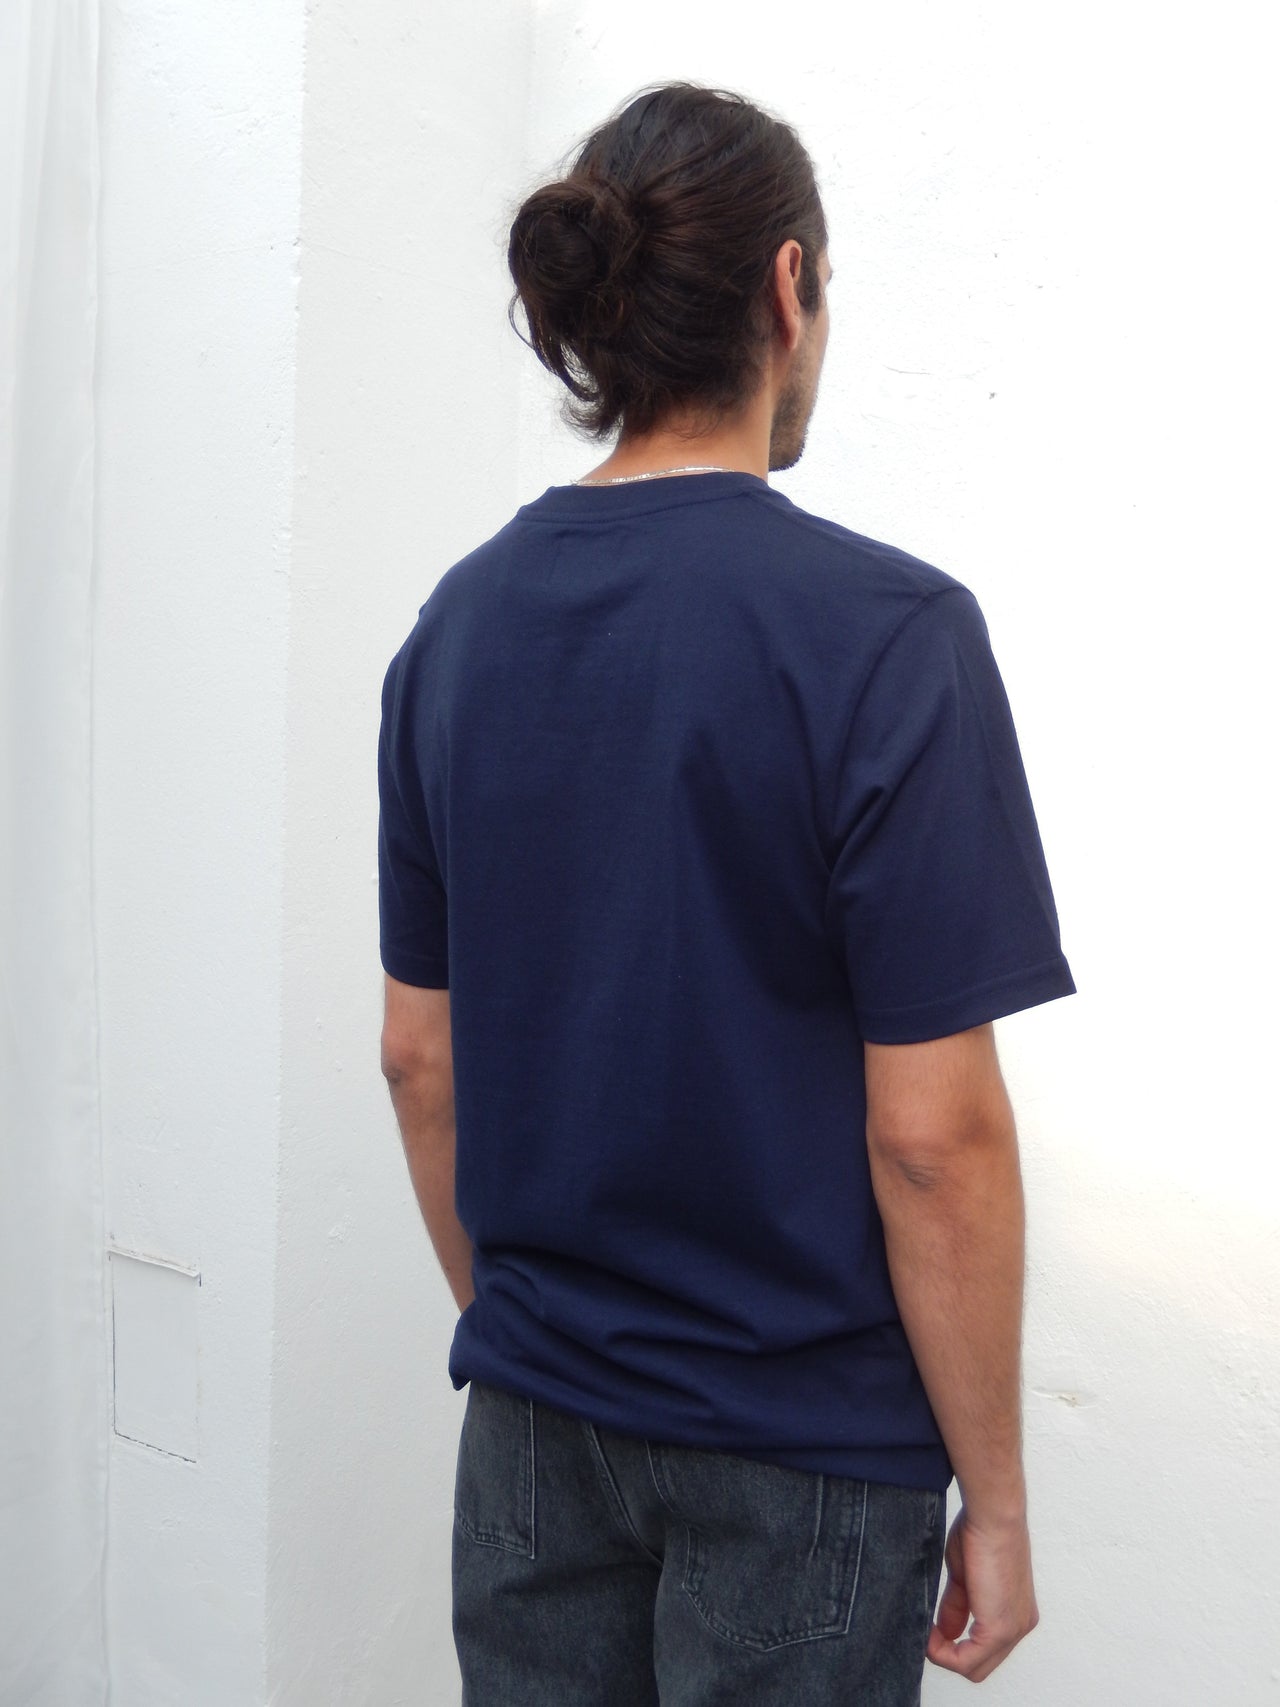 DUSTY COTTON FRODE POCKET T-SHIRT BY MADS NORGAARD